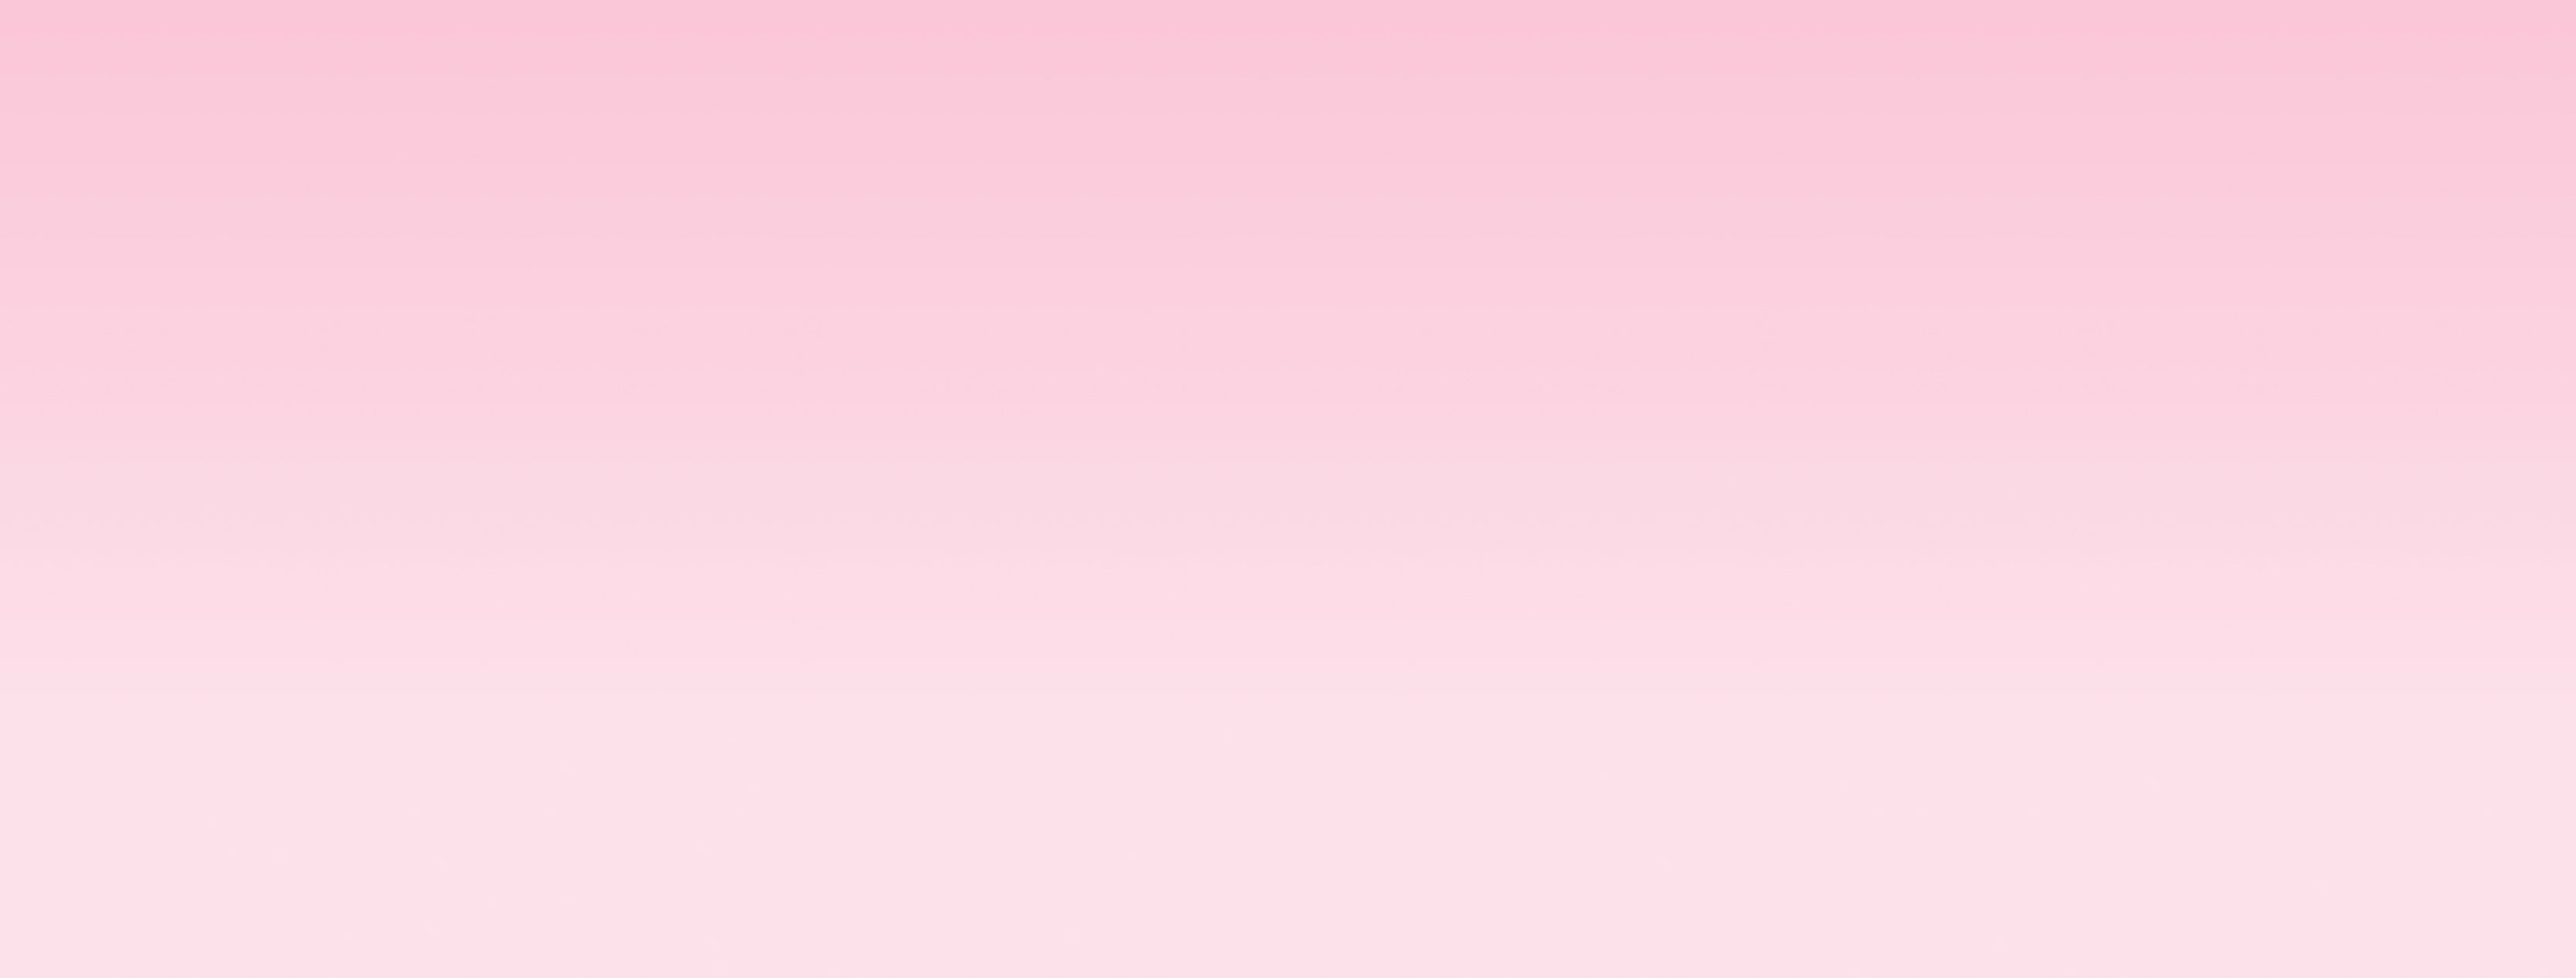 Light pink gradient abstract banner background